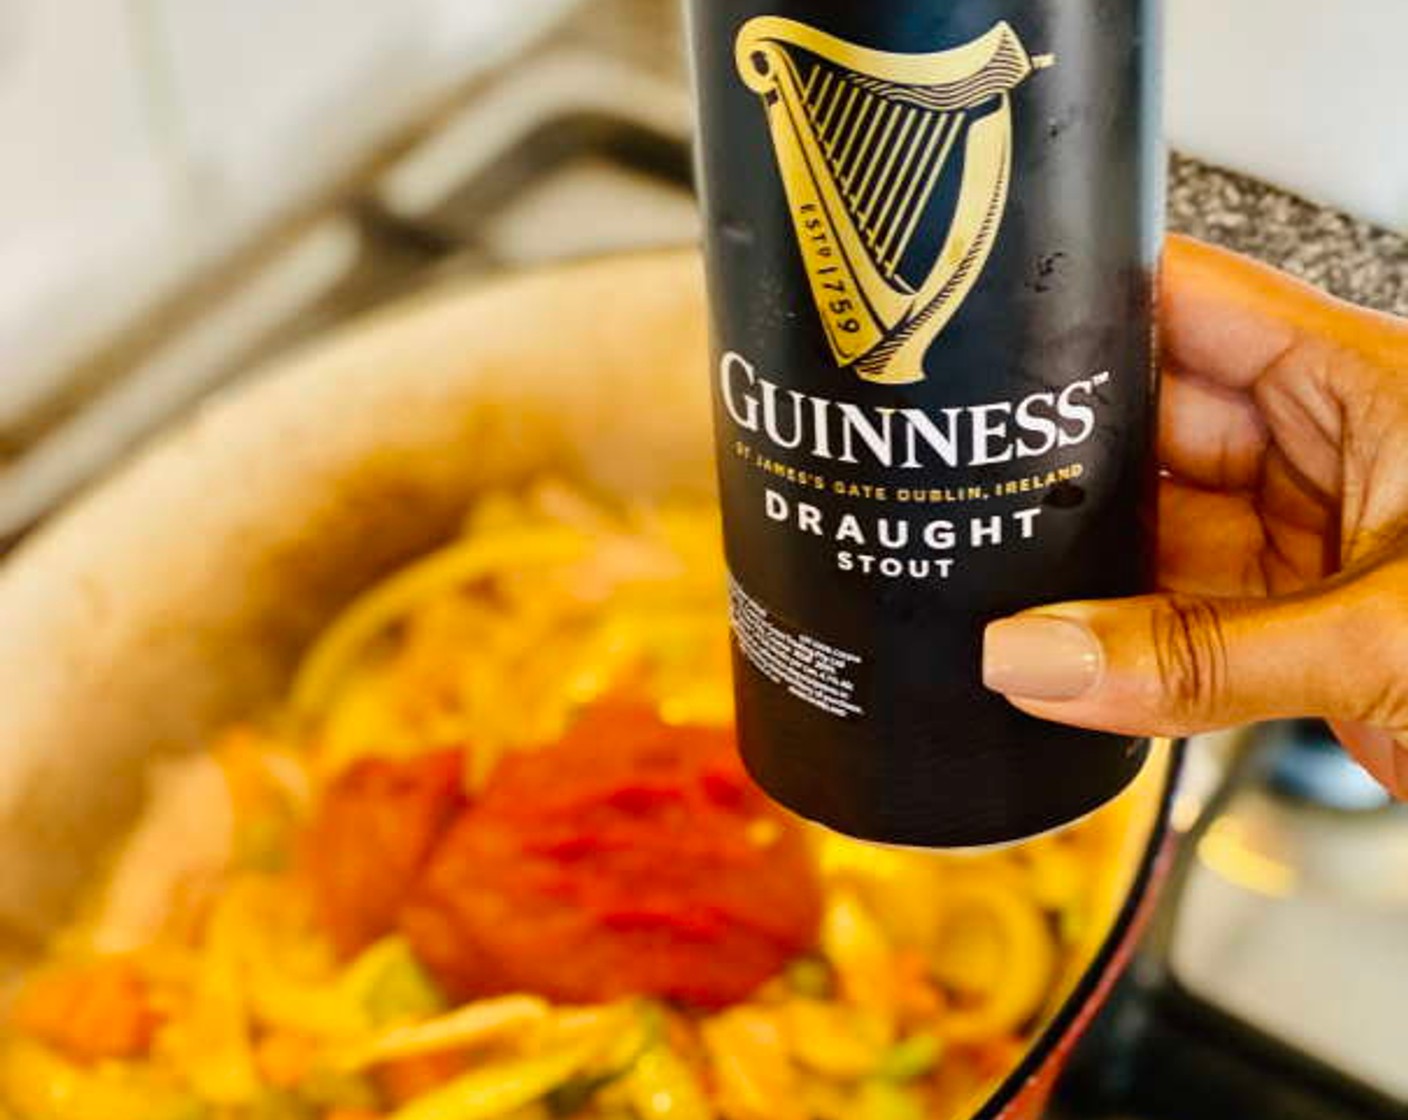 step 8 Add in the Tomato Paste (2 Tbsp) followed by the pint of Guinness® Stout Beer (1 3/4 cups) and give the pot a good mix. Return the lamb chops to the pot and cover them with the veggies and liquid as best you can to ensure the flavors penetrate as it cooks.